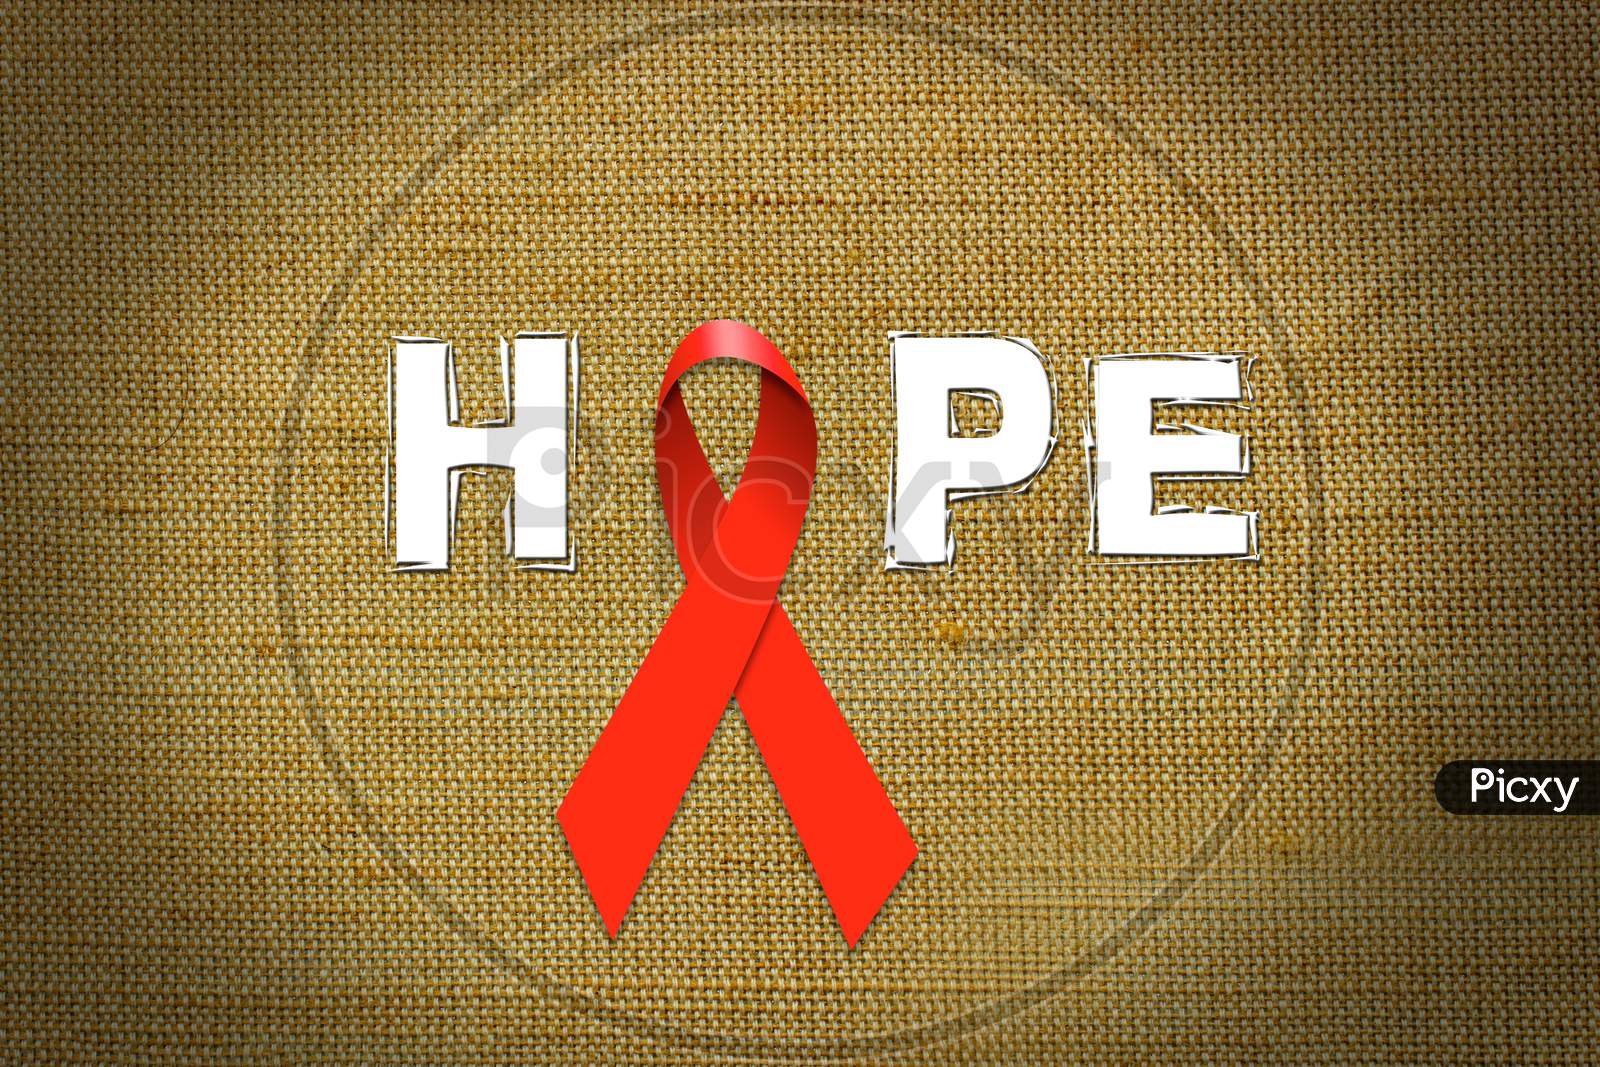 Aids Awareness Red Ribbon with HOPE Text